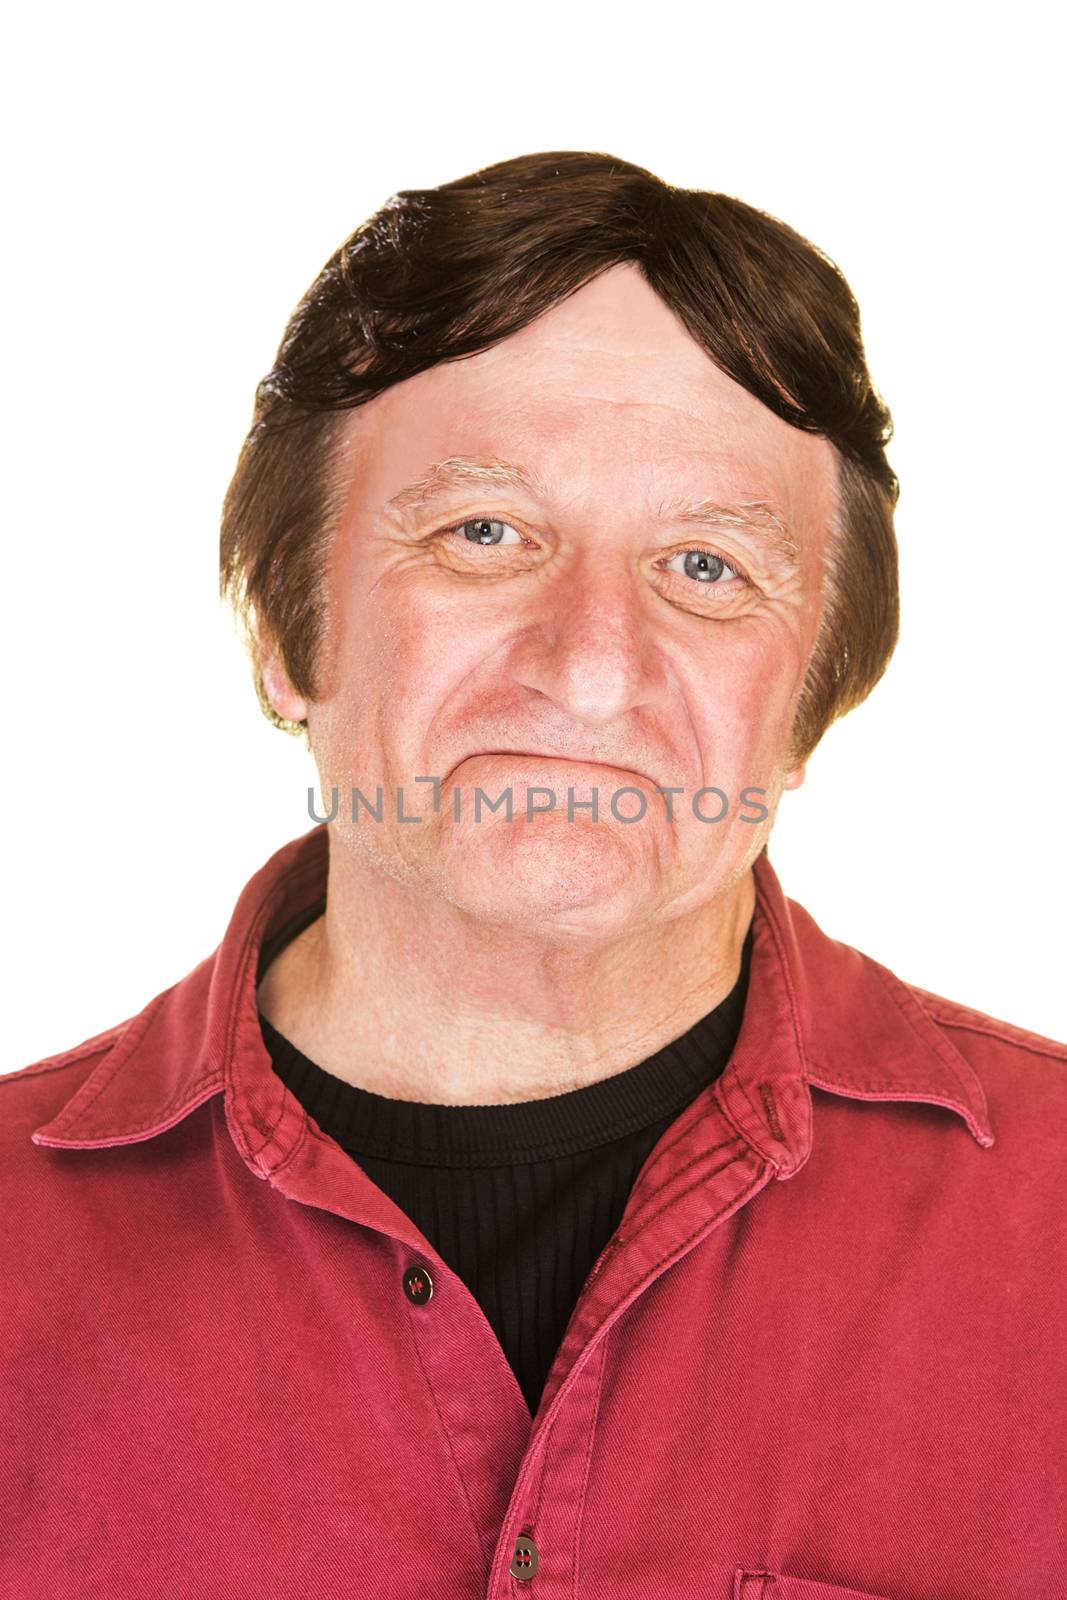 Single easygoing man with friendly expression over white